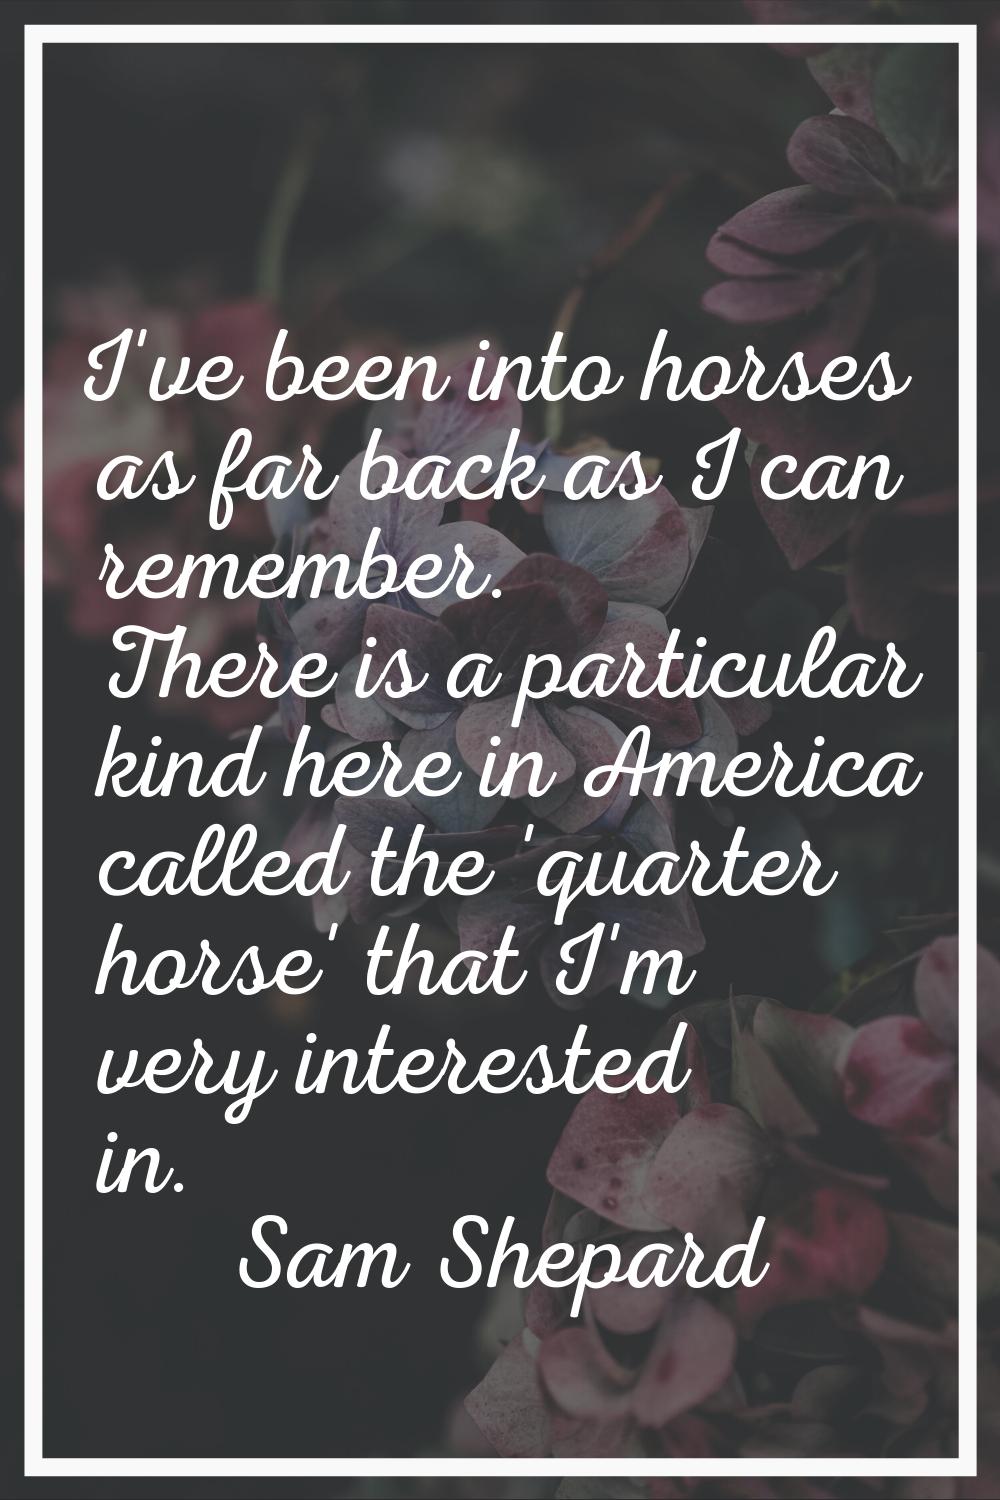 I've been into horses as far back as I can remember. There is a particular kind here in America cal